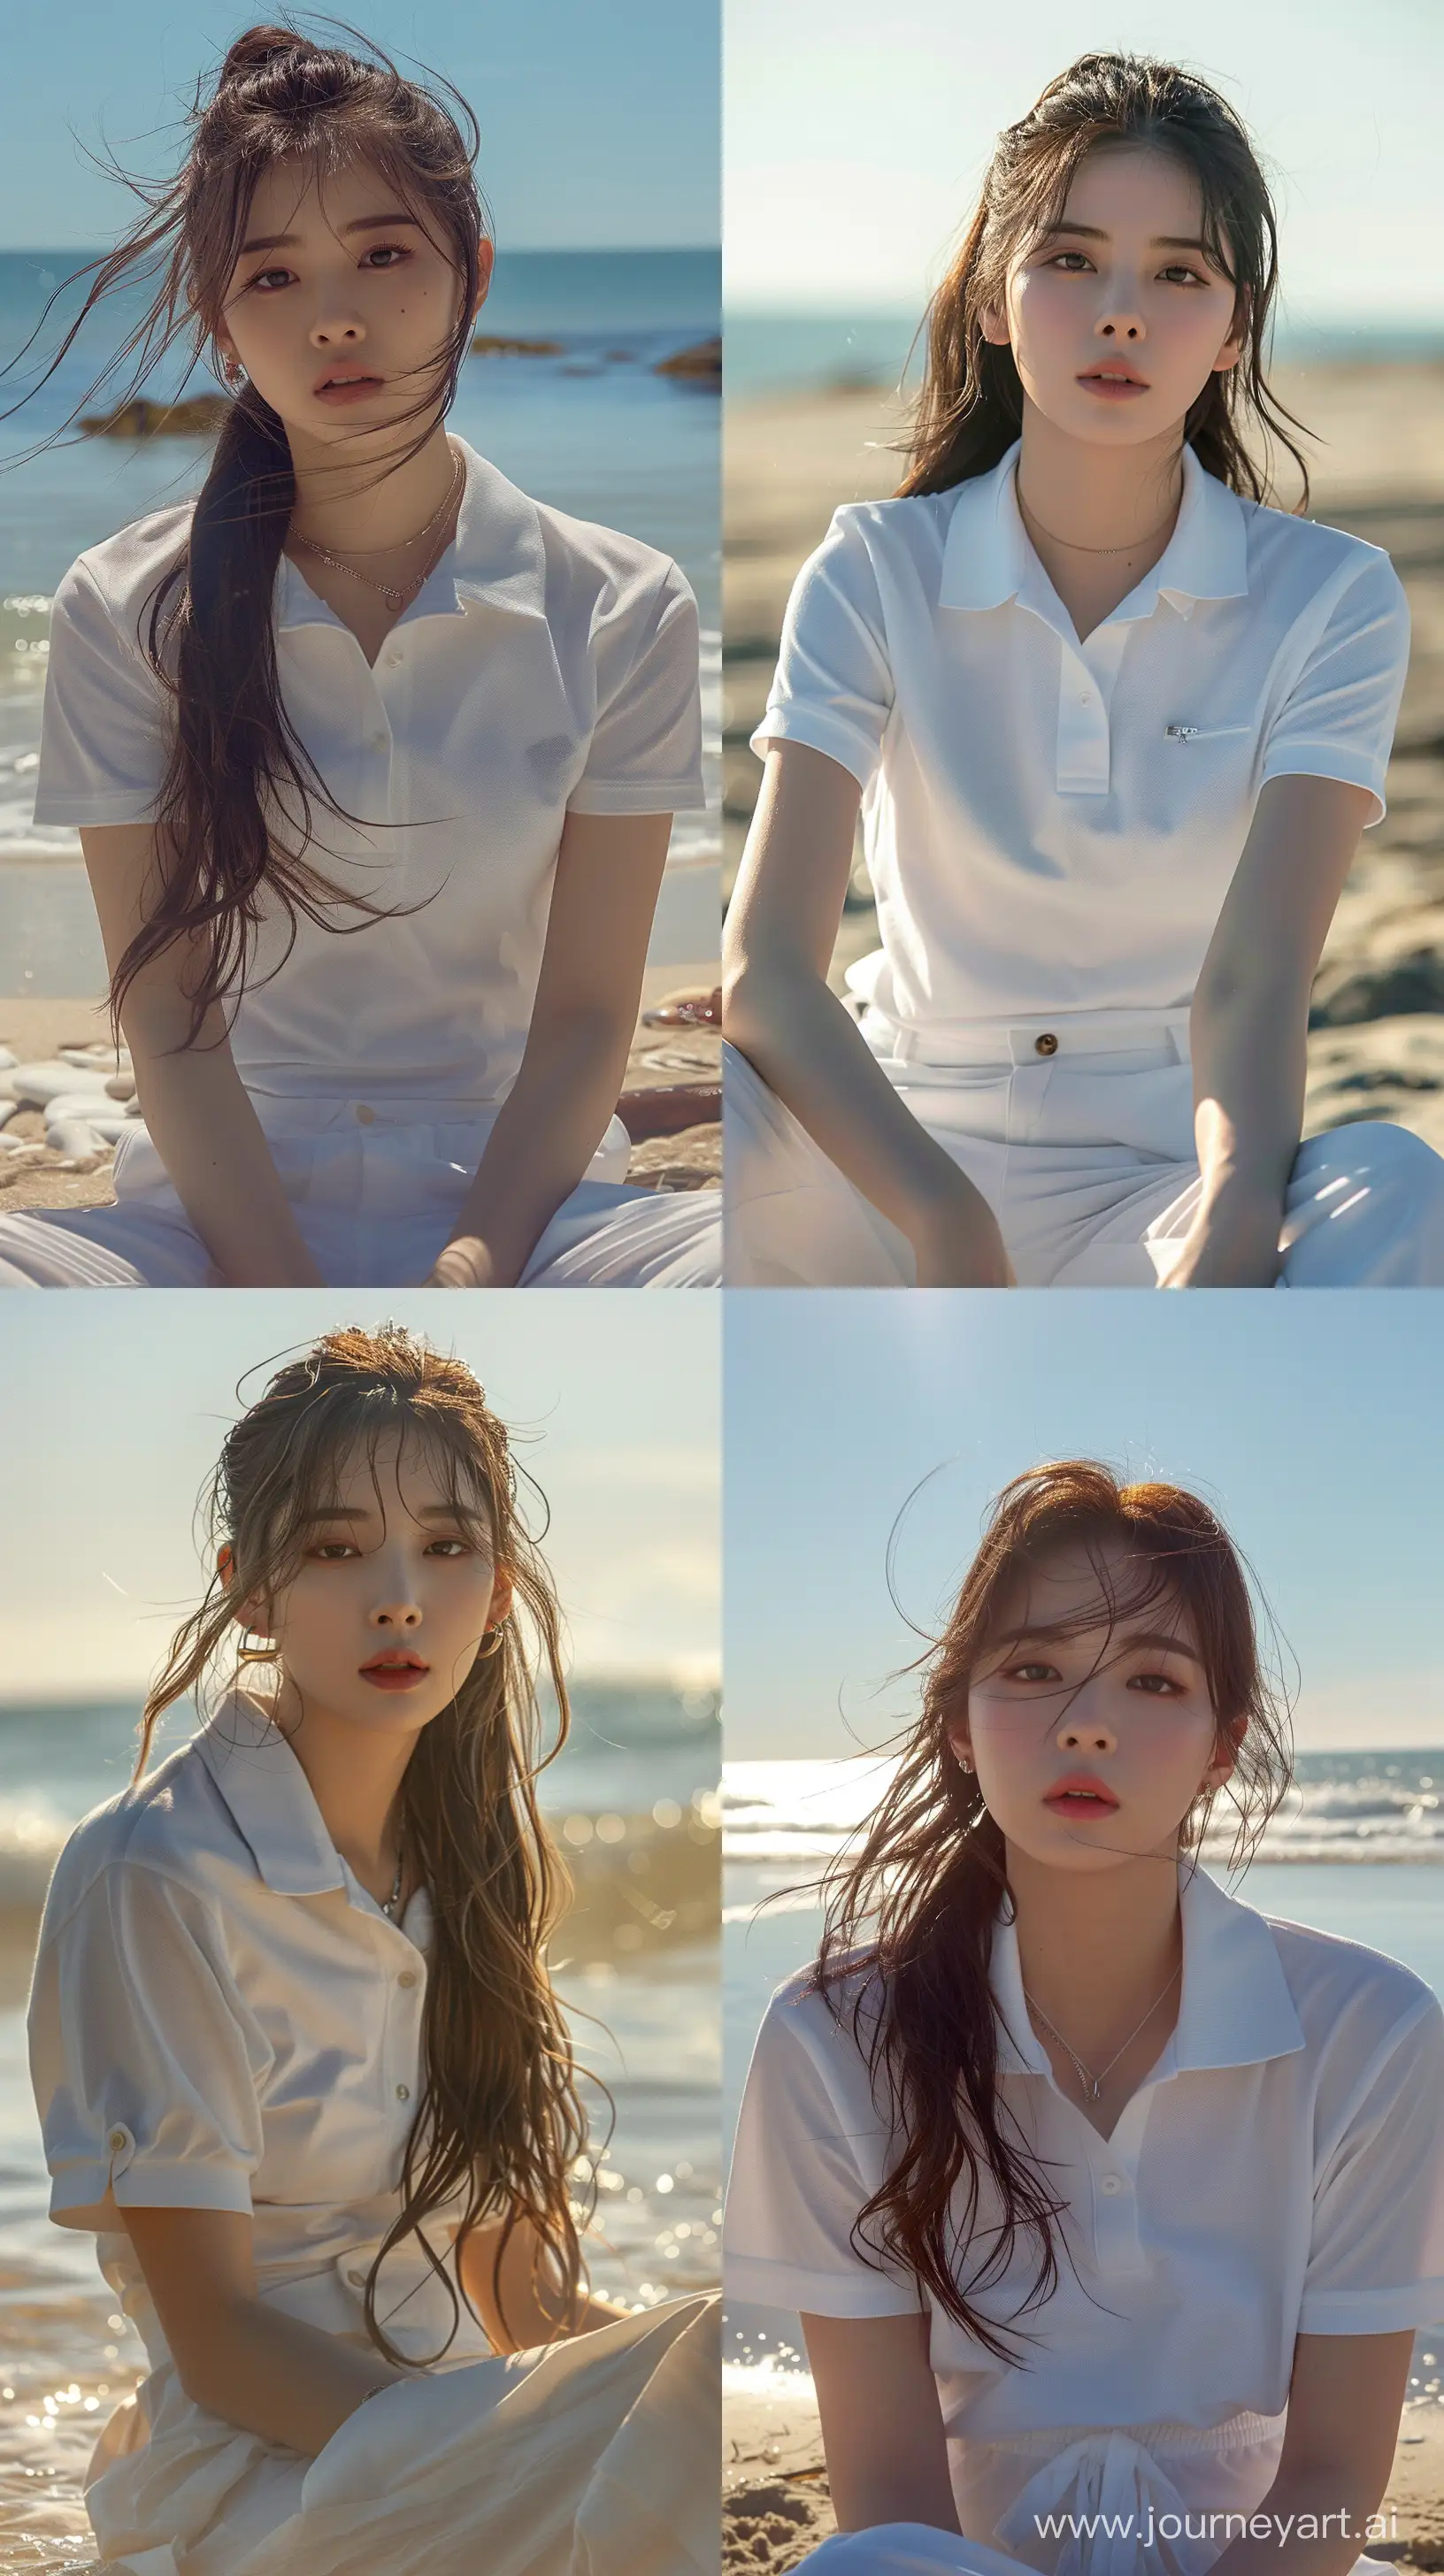 Blackpinks-Jennie-Relaxing-on-Beach-in-Casual-White-Polo-Shirt